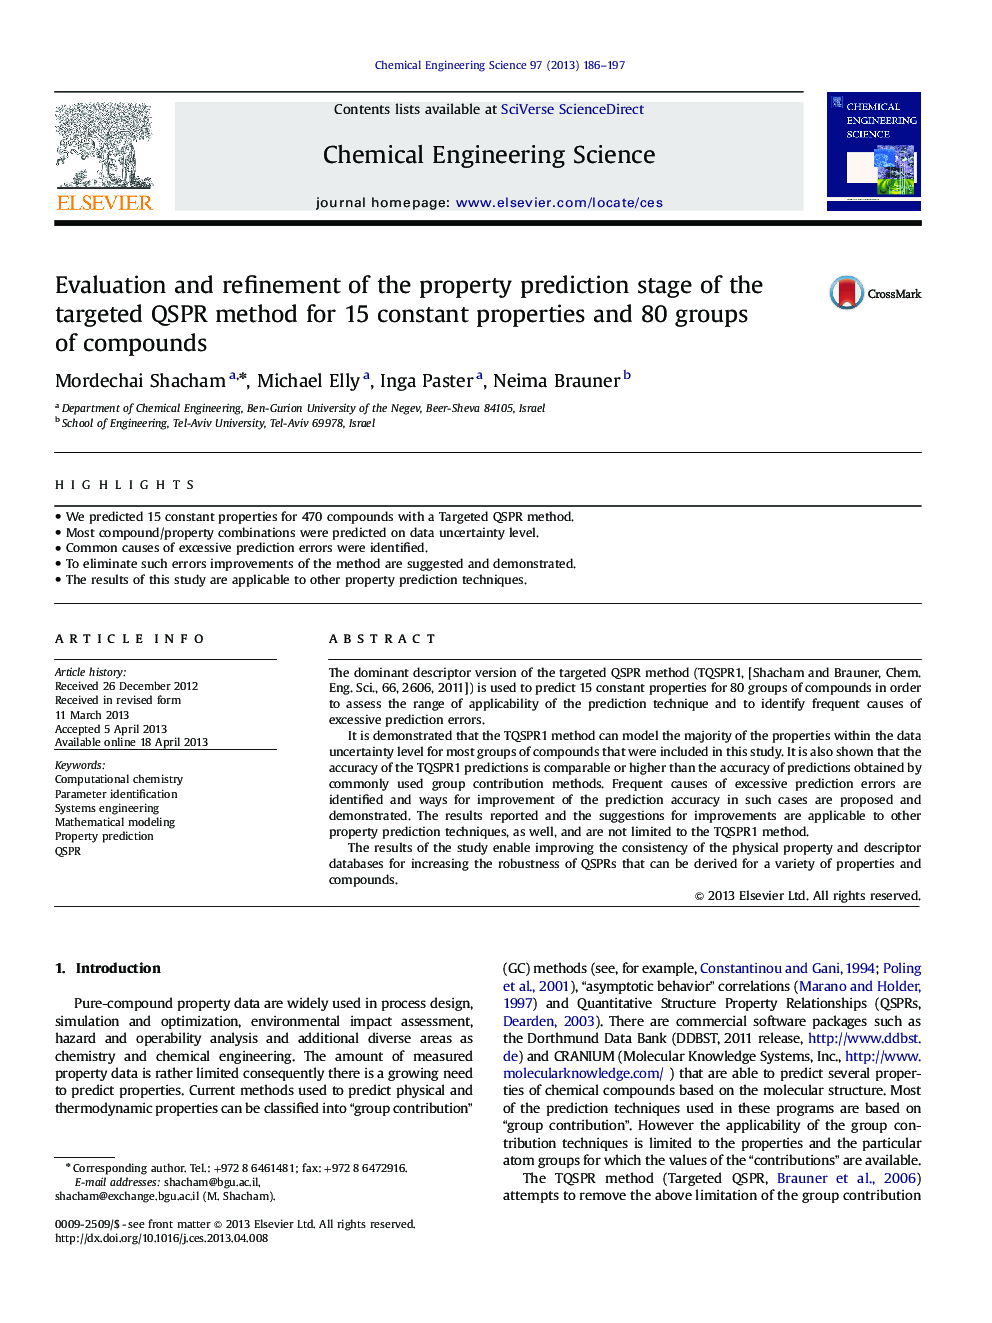 Evaluation and refinement of the property prediction stage of the targeted QSPR method for 15 constant properties and 80 groups of compounds